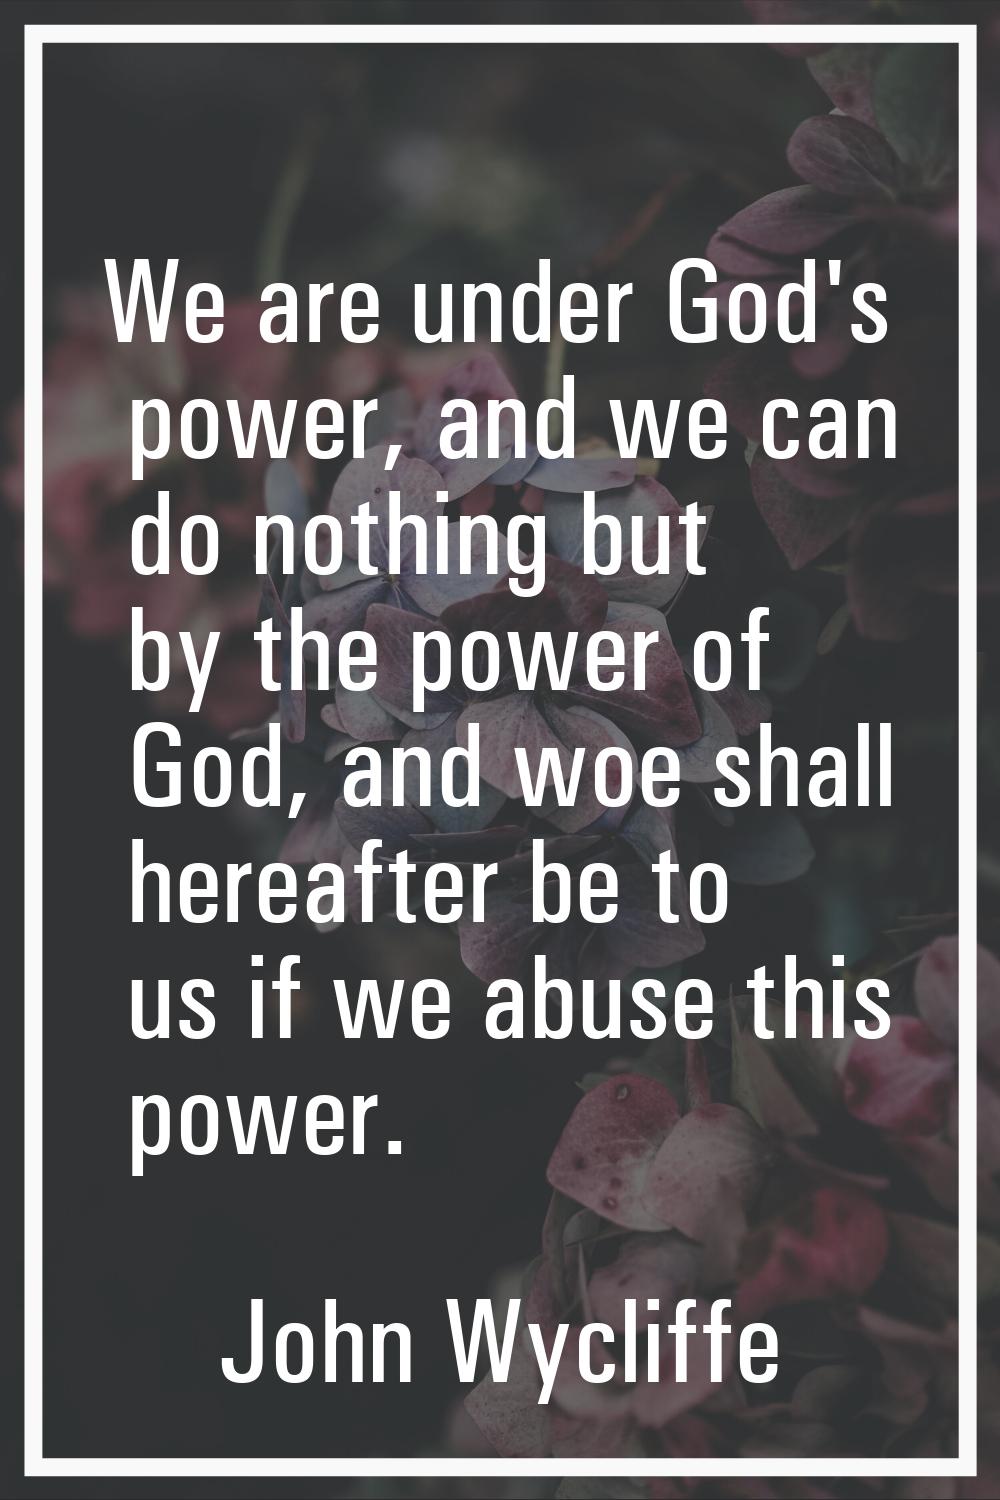 We are under God's power, and we can do nothing but by the power of God, and woe shall hereafter be